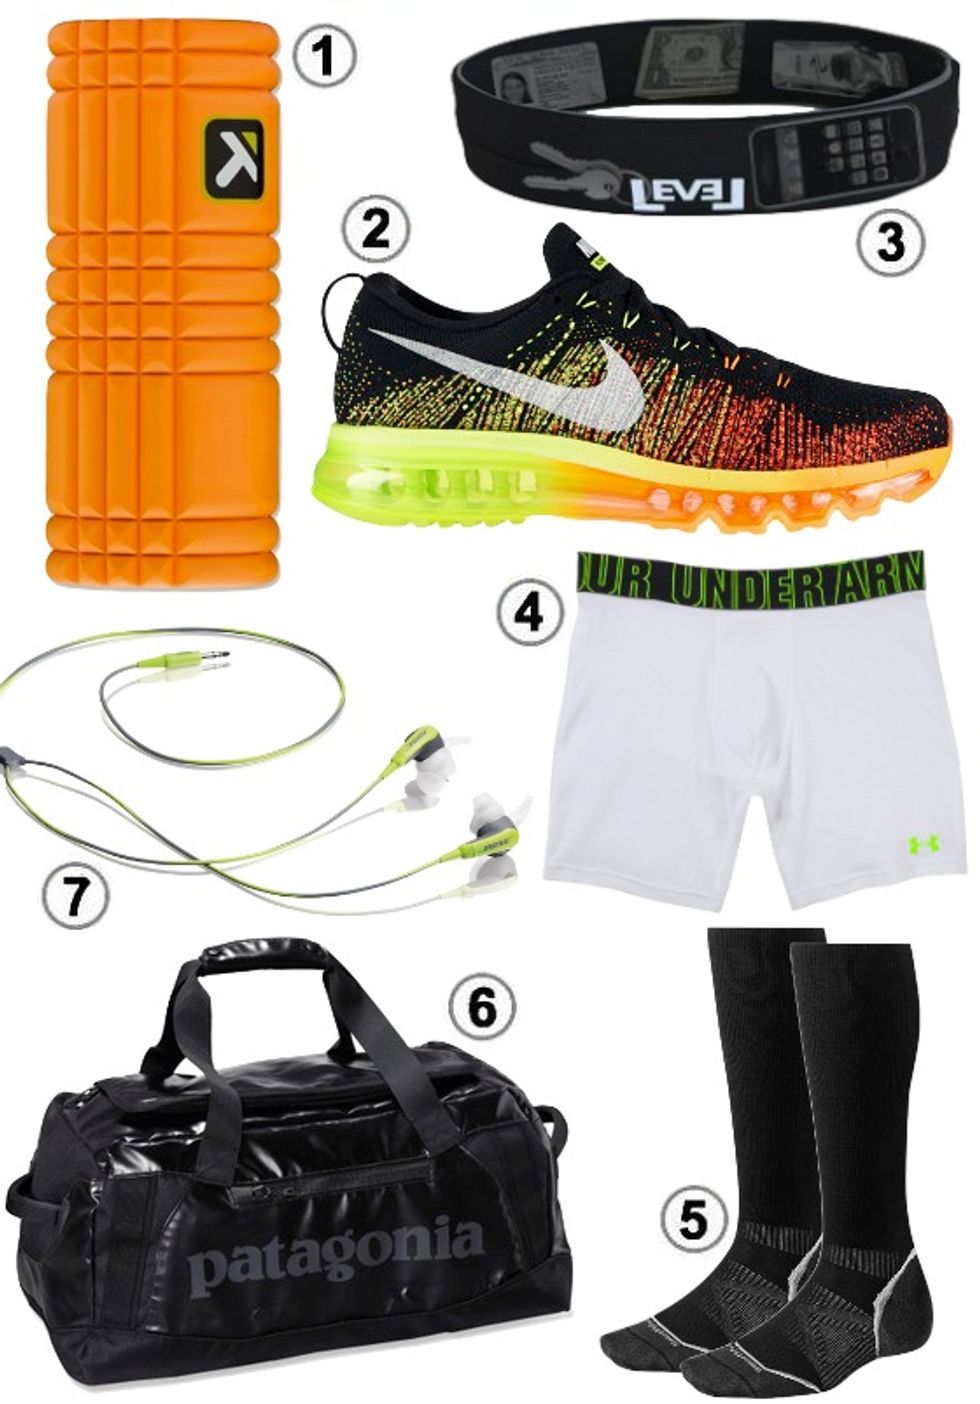 Look of the Week: Top Fitness Gear for the Guys